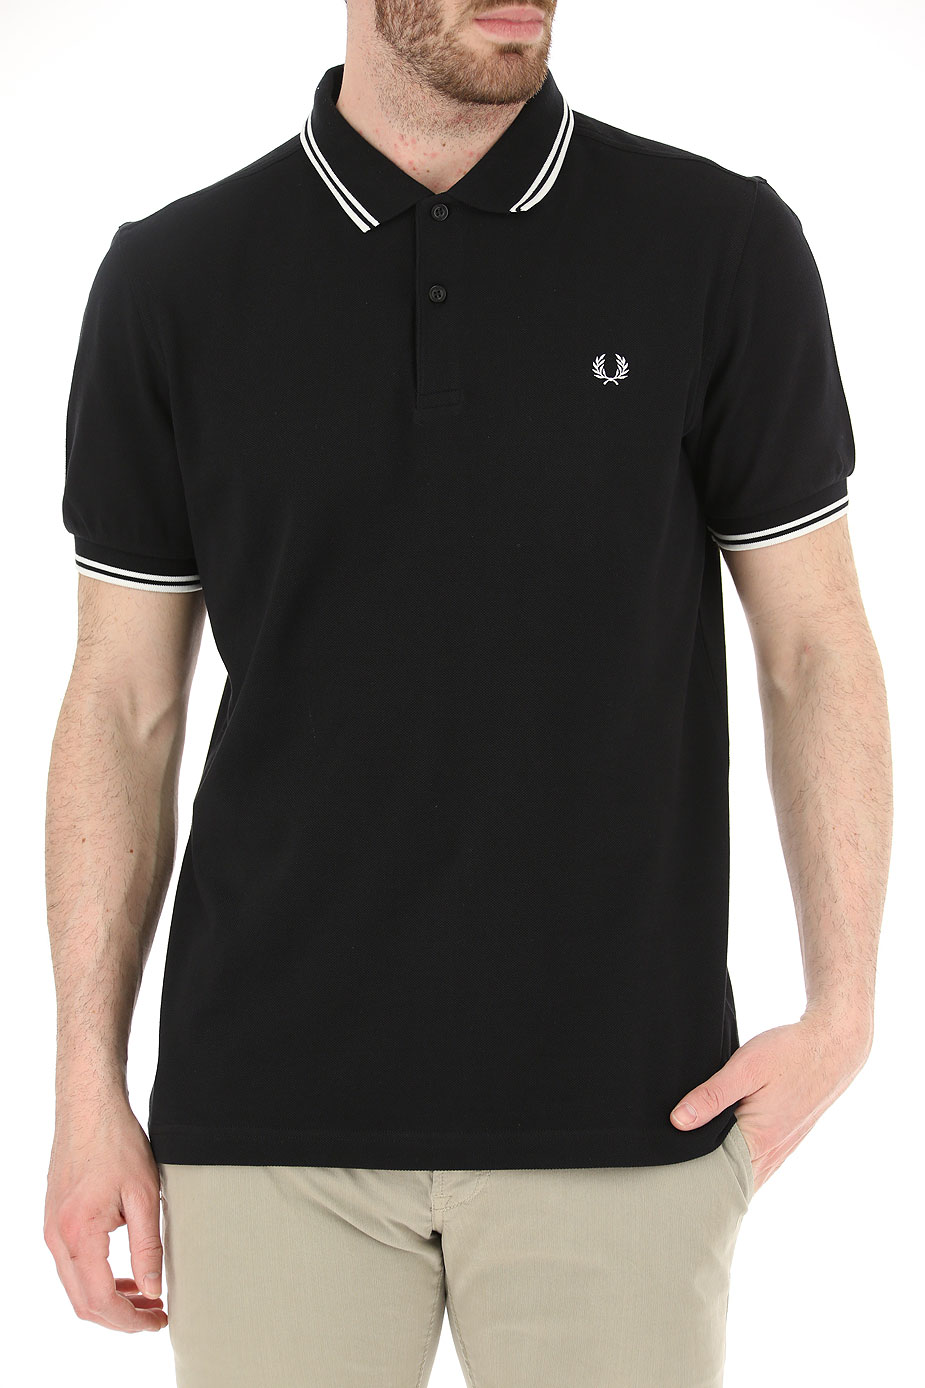 Mens Clothing Fred Perry, Style code: m3600-524-